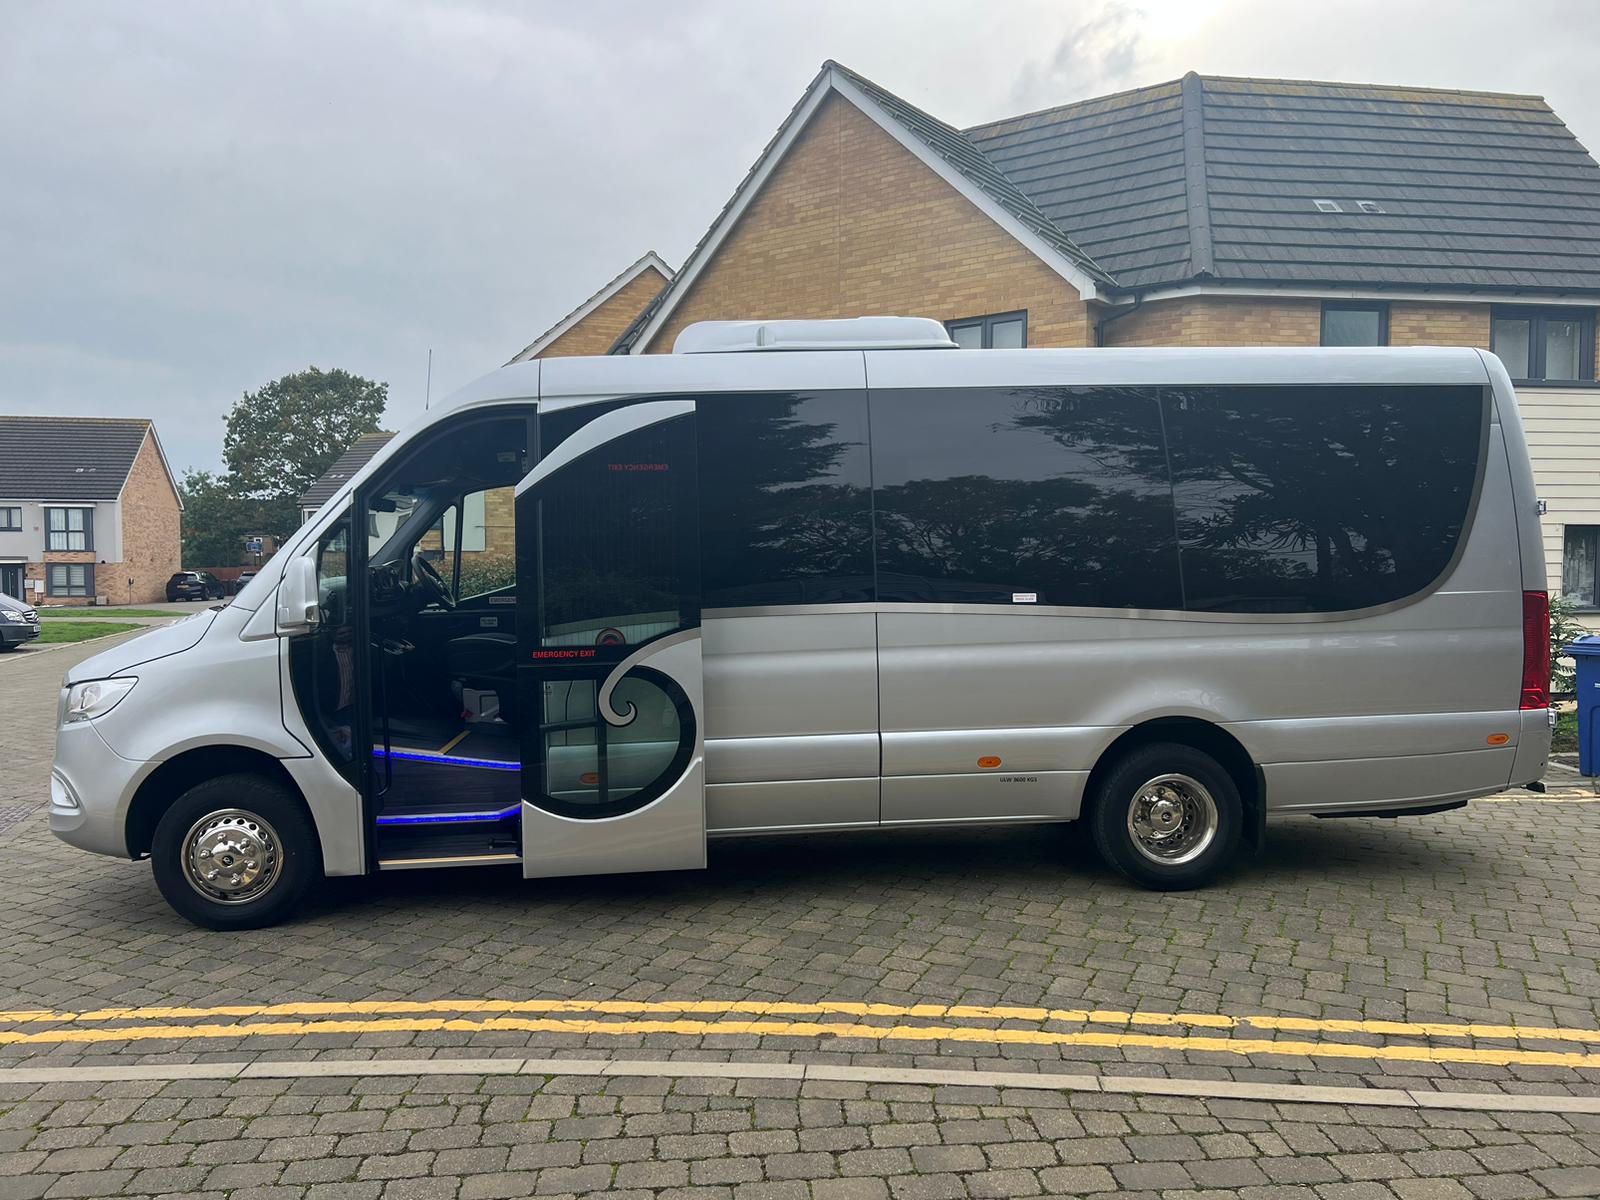 Minibus Hire for Day Trips: Exploring the Best UK Destinations for Small Groups